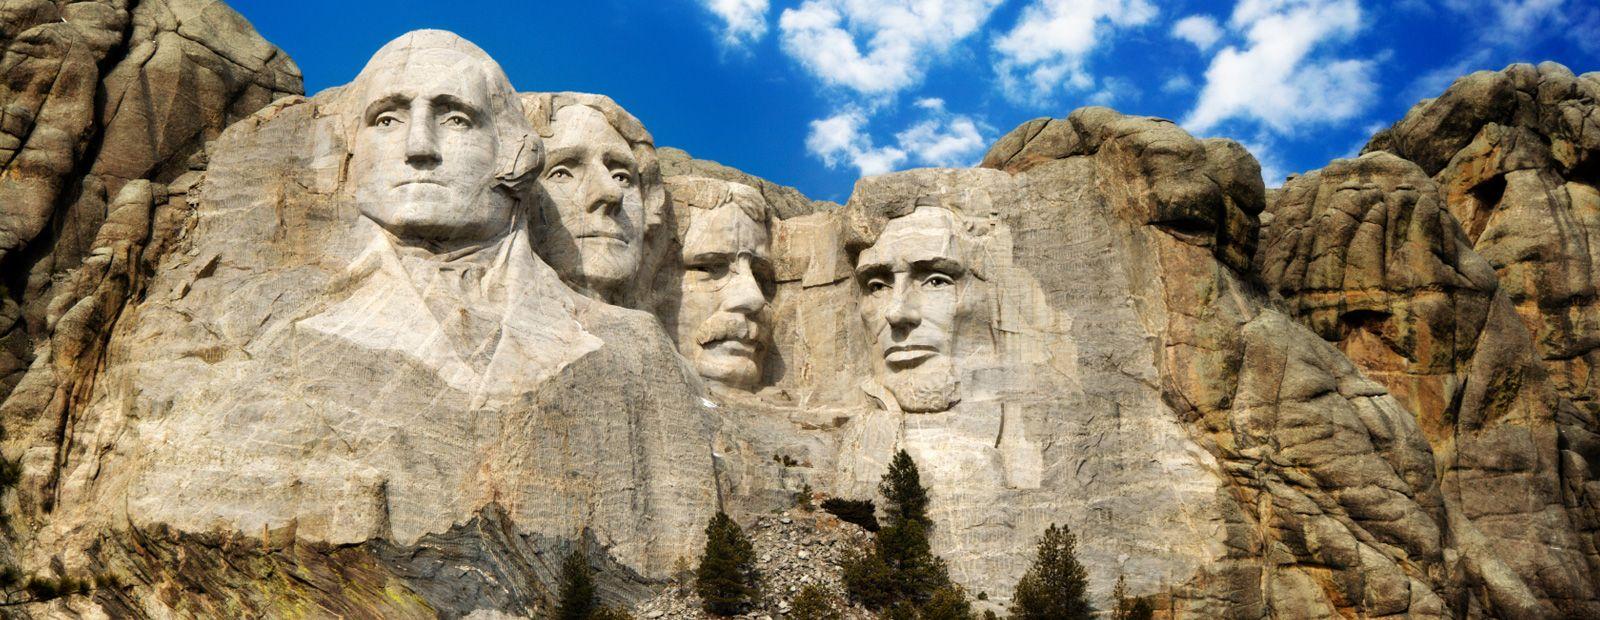 Mount Rushmore wallpapers, Man Made, HQ Mount Rushmore pictures